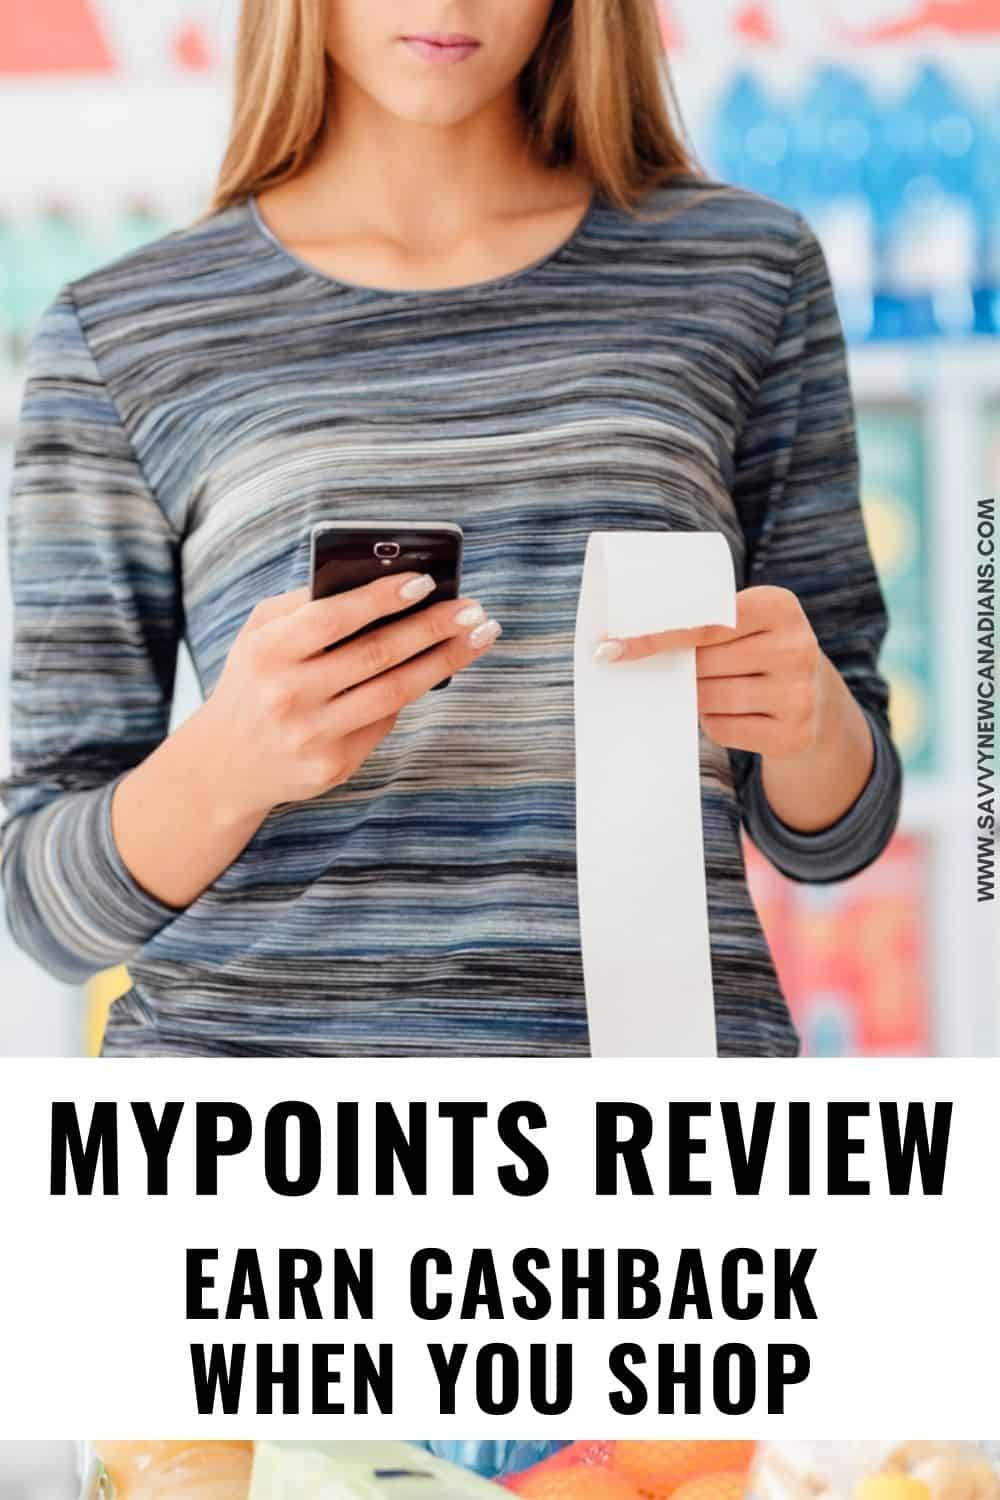 MyPoints Review: Is it Legit and Safe?